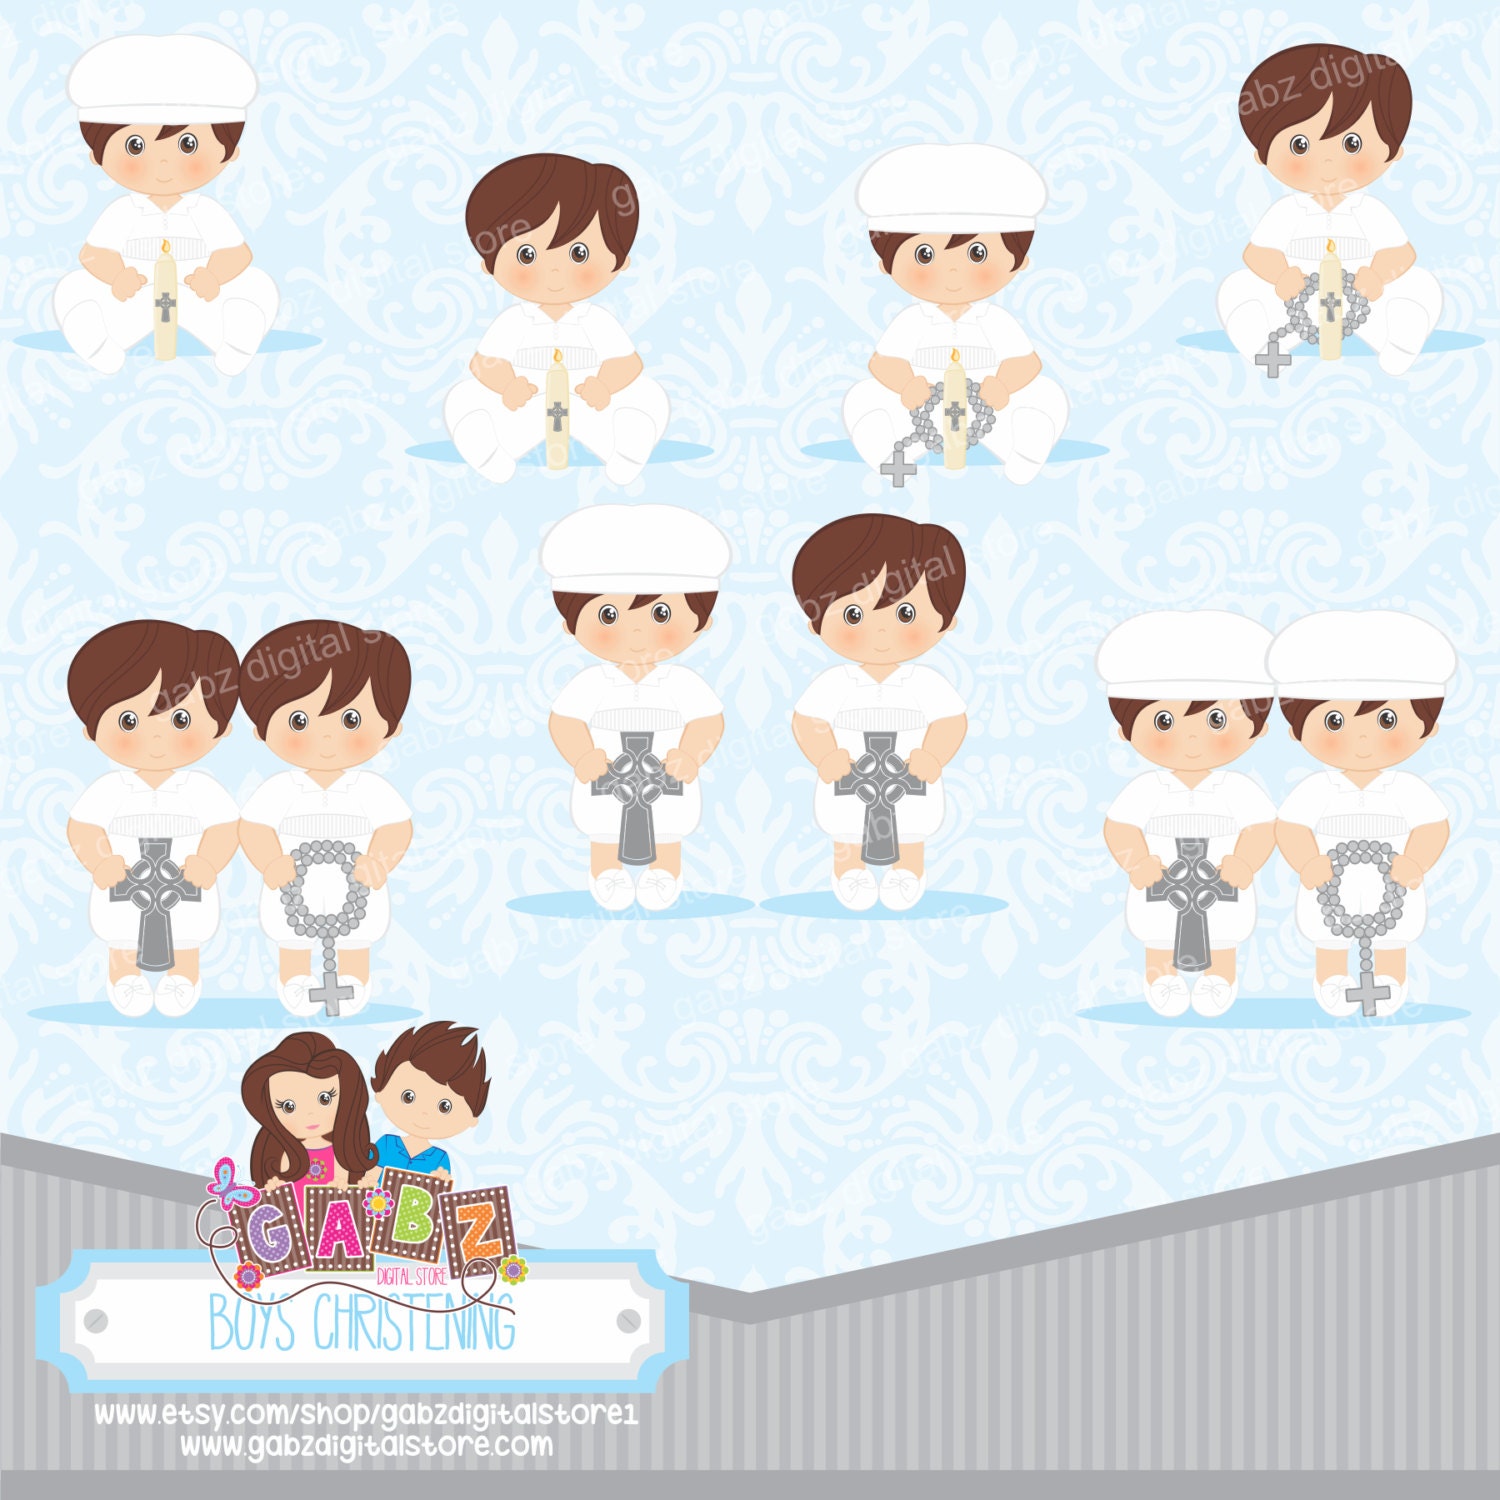 clipart christening of baby - photo #27